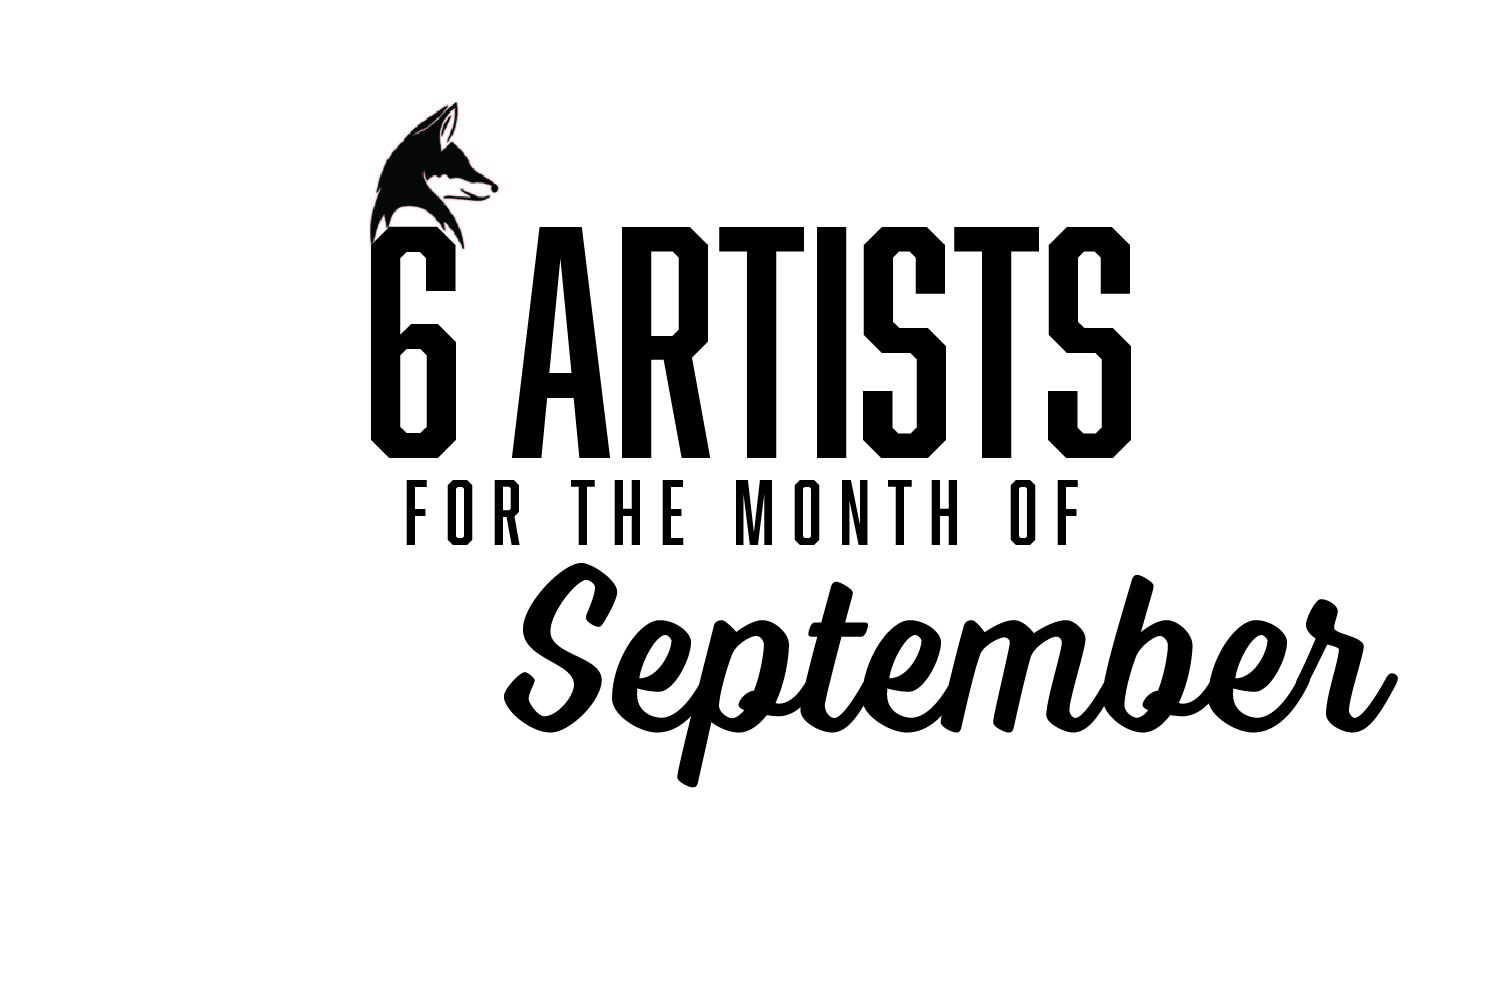 Six Artists You Should Be Listening To: September 2020 EDITION